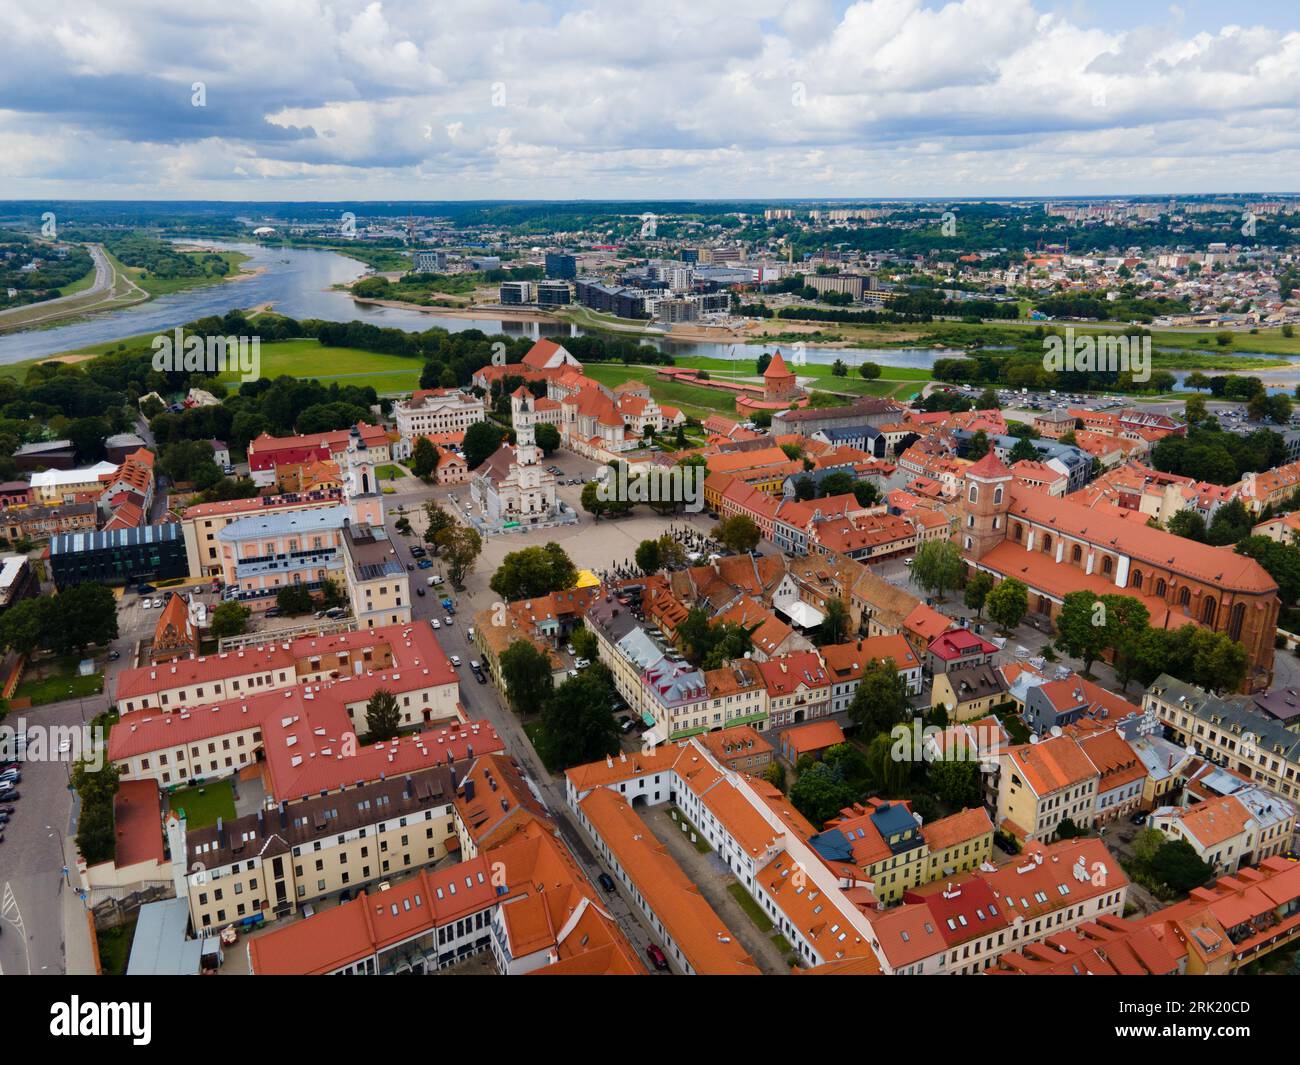 An aerial view of the picturesque town of Kaunas, Lithuania Stock Photo